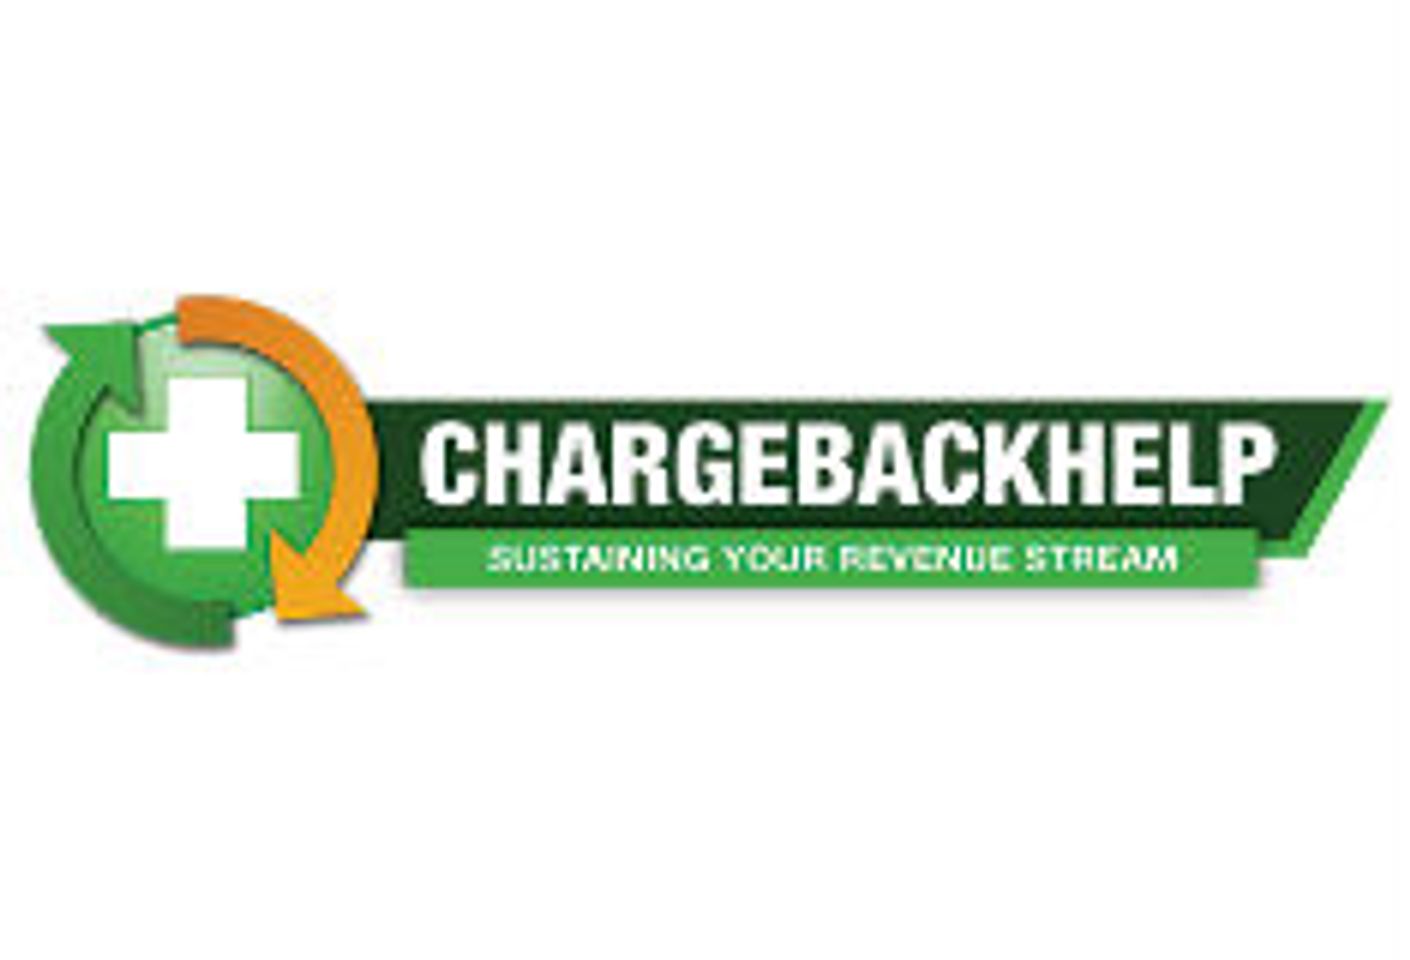 NetBilling and ChargebackHelp Team Up to Fight Fraud